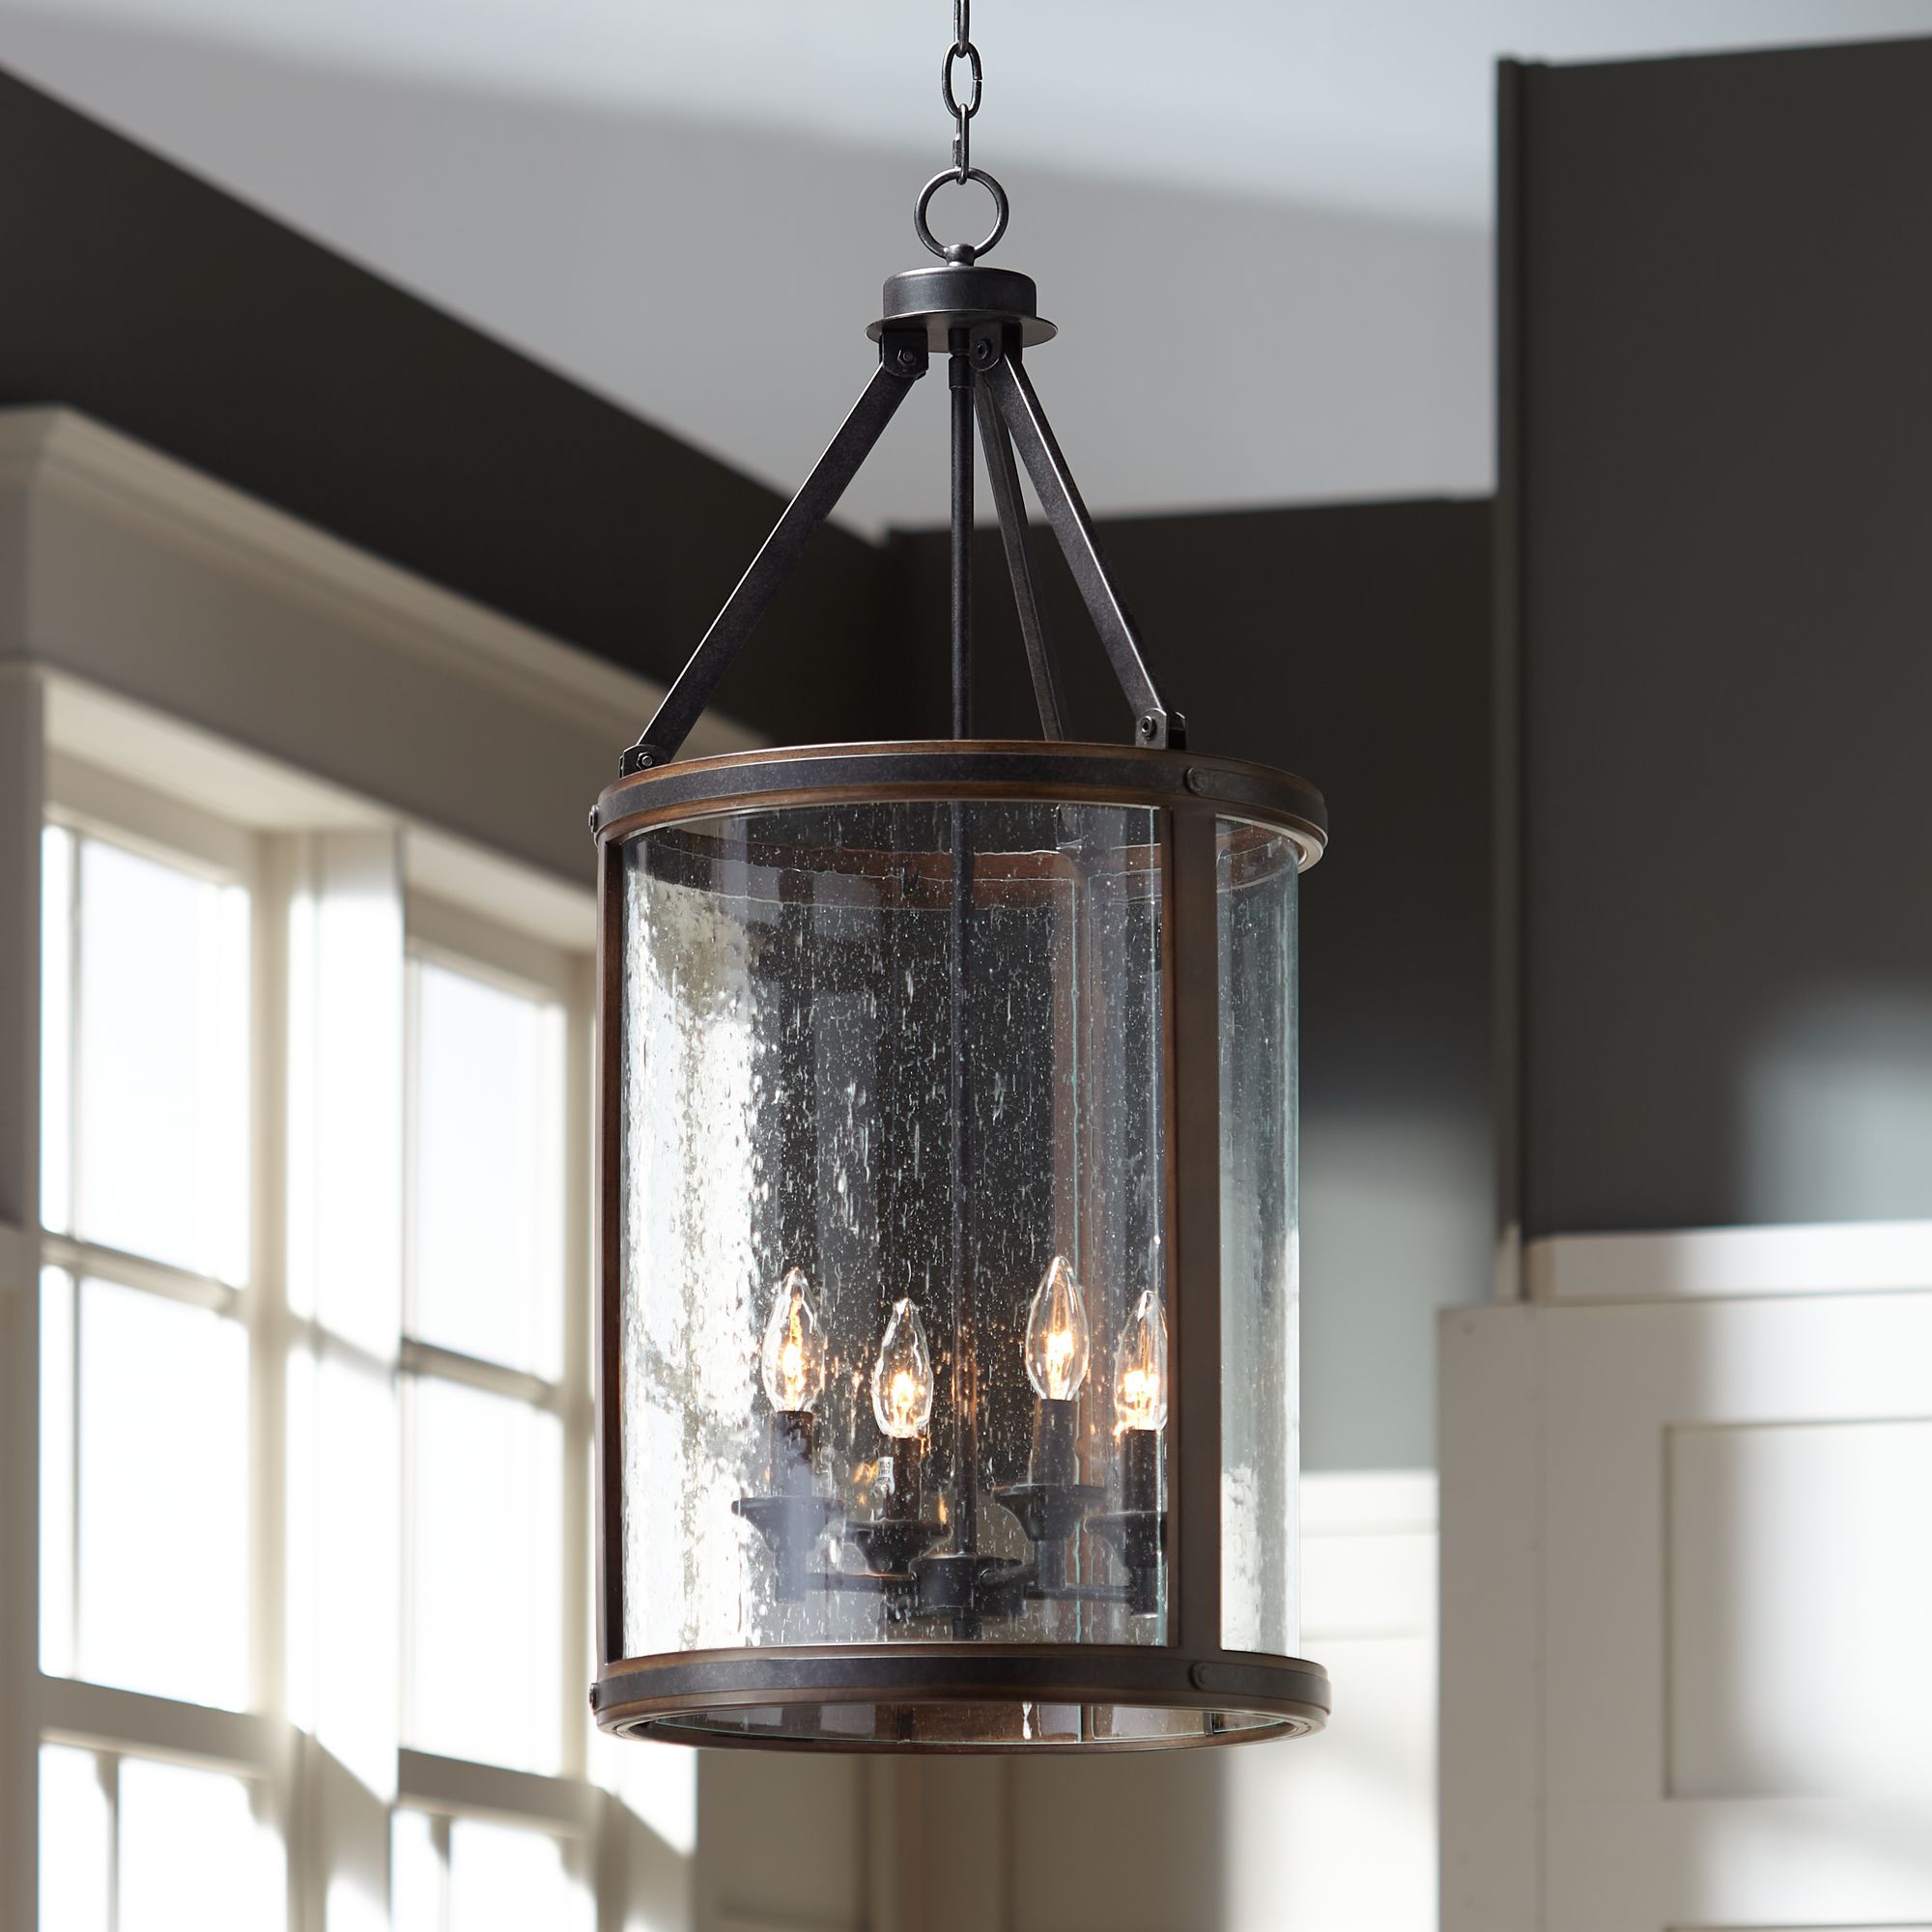 Rustic Gray Lantern Chandeliers Pertaining To Latest Franklin Iron Works Metal Wood Pendant Chandelier 16" Wide Rustic Farmhouse  Clear Seeded Glass 4 Light Fixture Dining Room Foyer – Walmart (View 8 of 15)